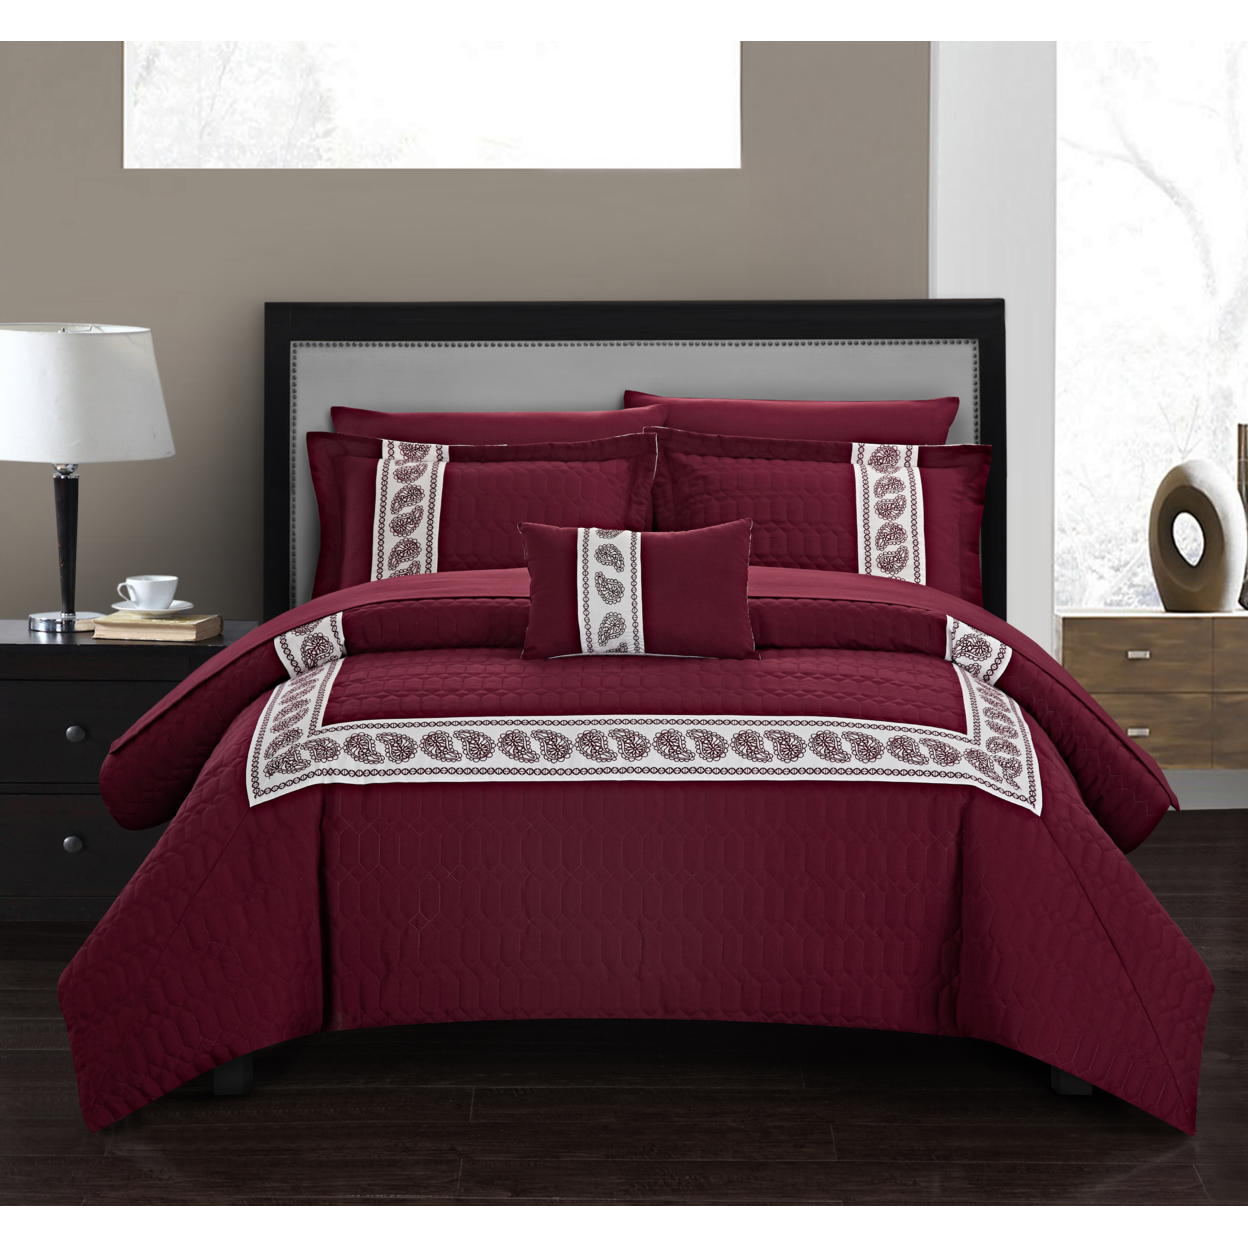 Keegan 8 Or 6 Piece Comforter Set Hotel Collection Hexagon Embossed Paisley Print Border Design Bed In A Bag - Burgundy, Twin